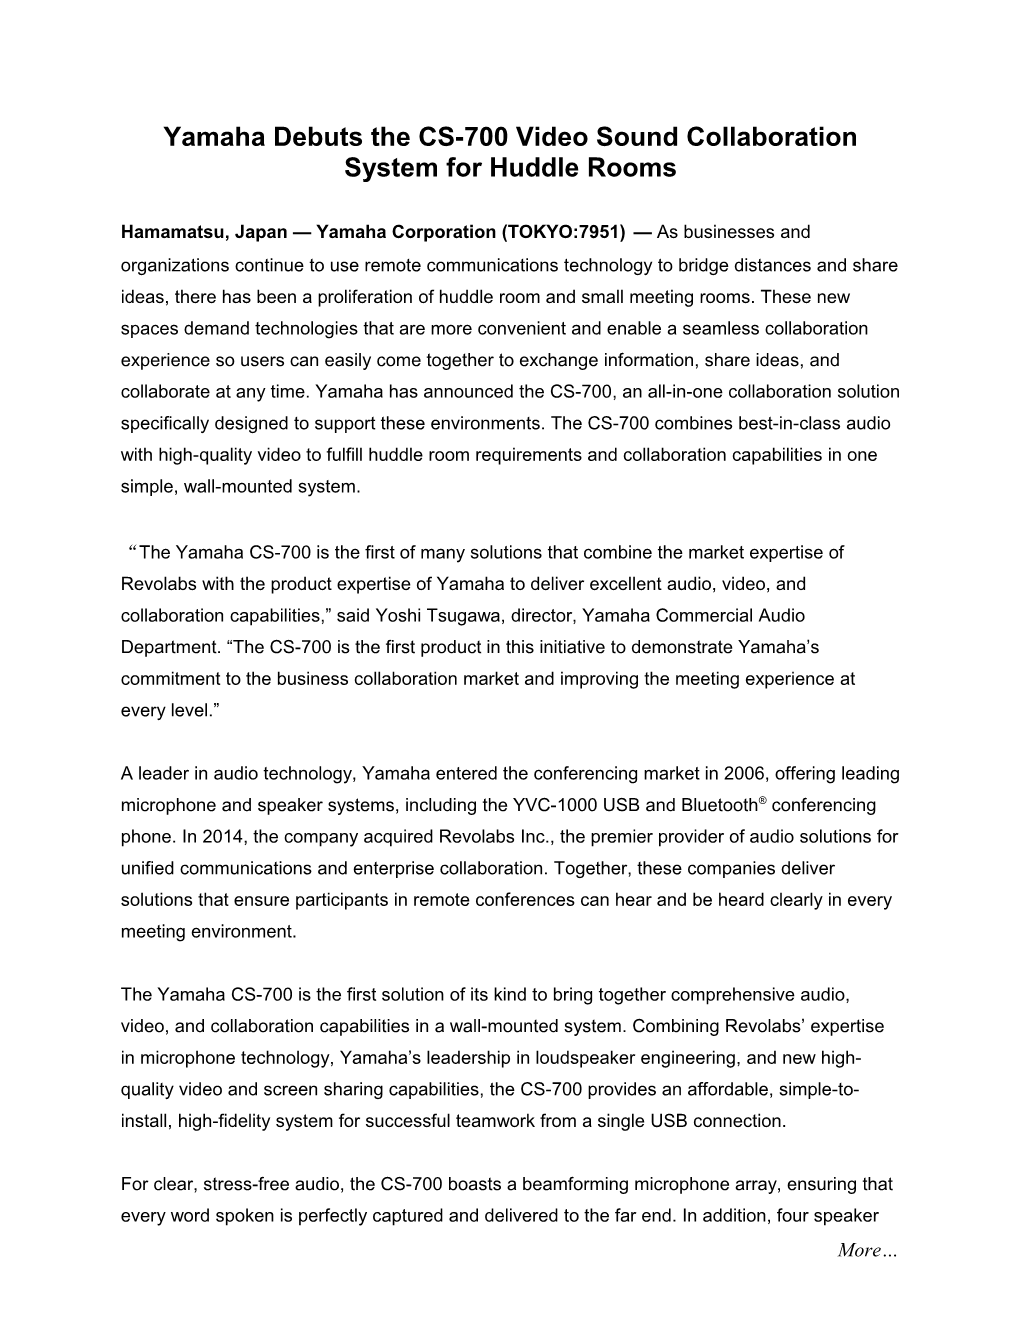 Yamaha Debuts the CS-700 Video Sound Collaboration System for Huddle Rooms